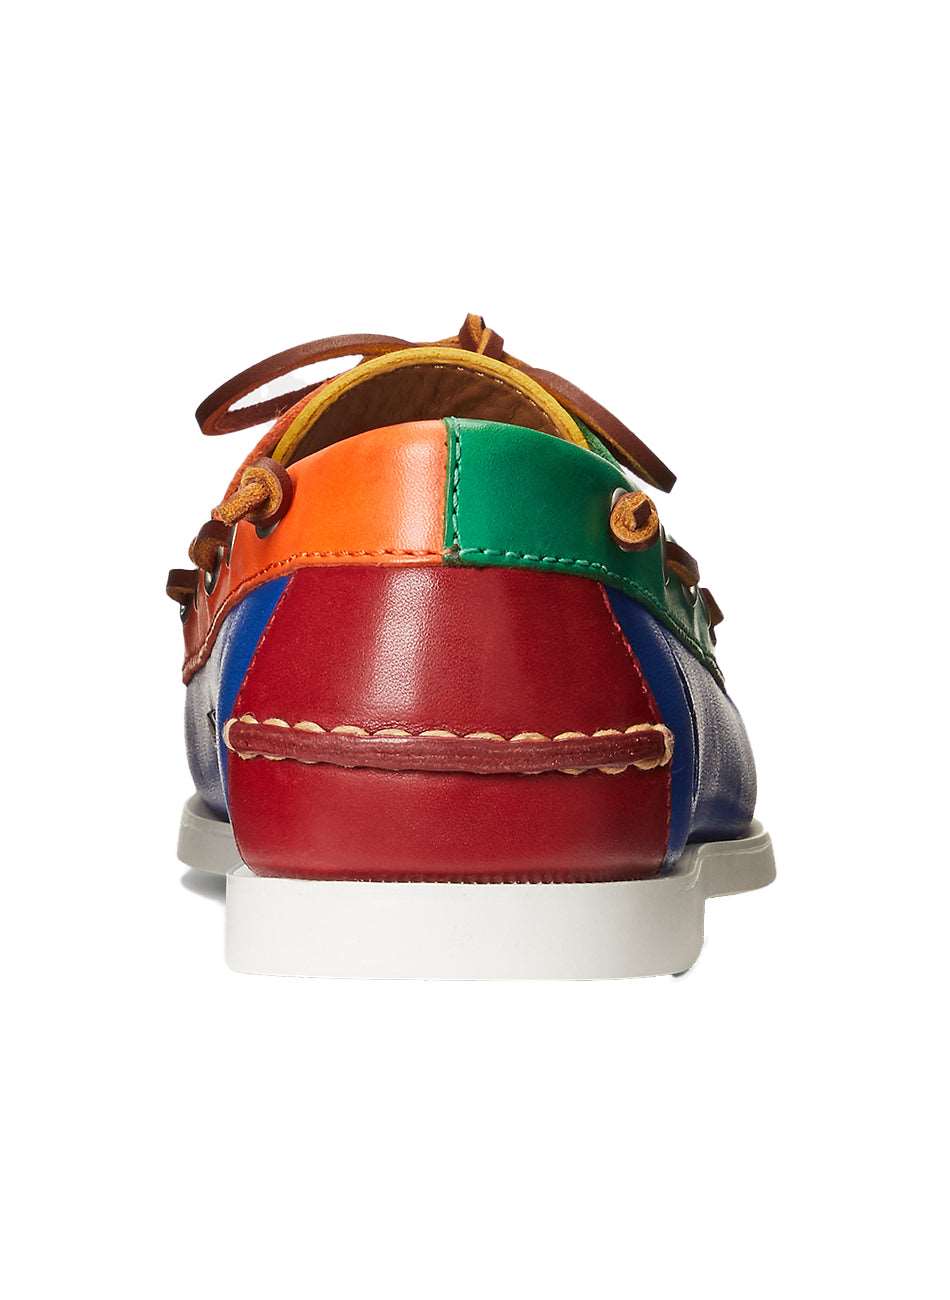 Merton Color-Blocked Leather Boat Shoes - Colorblock